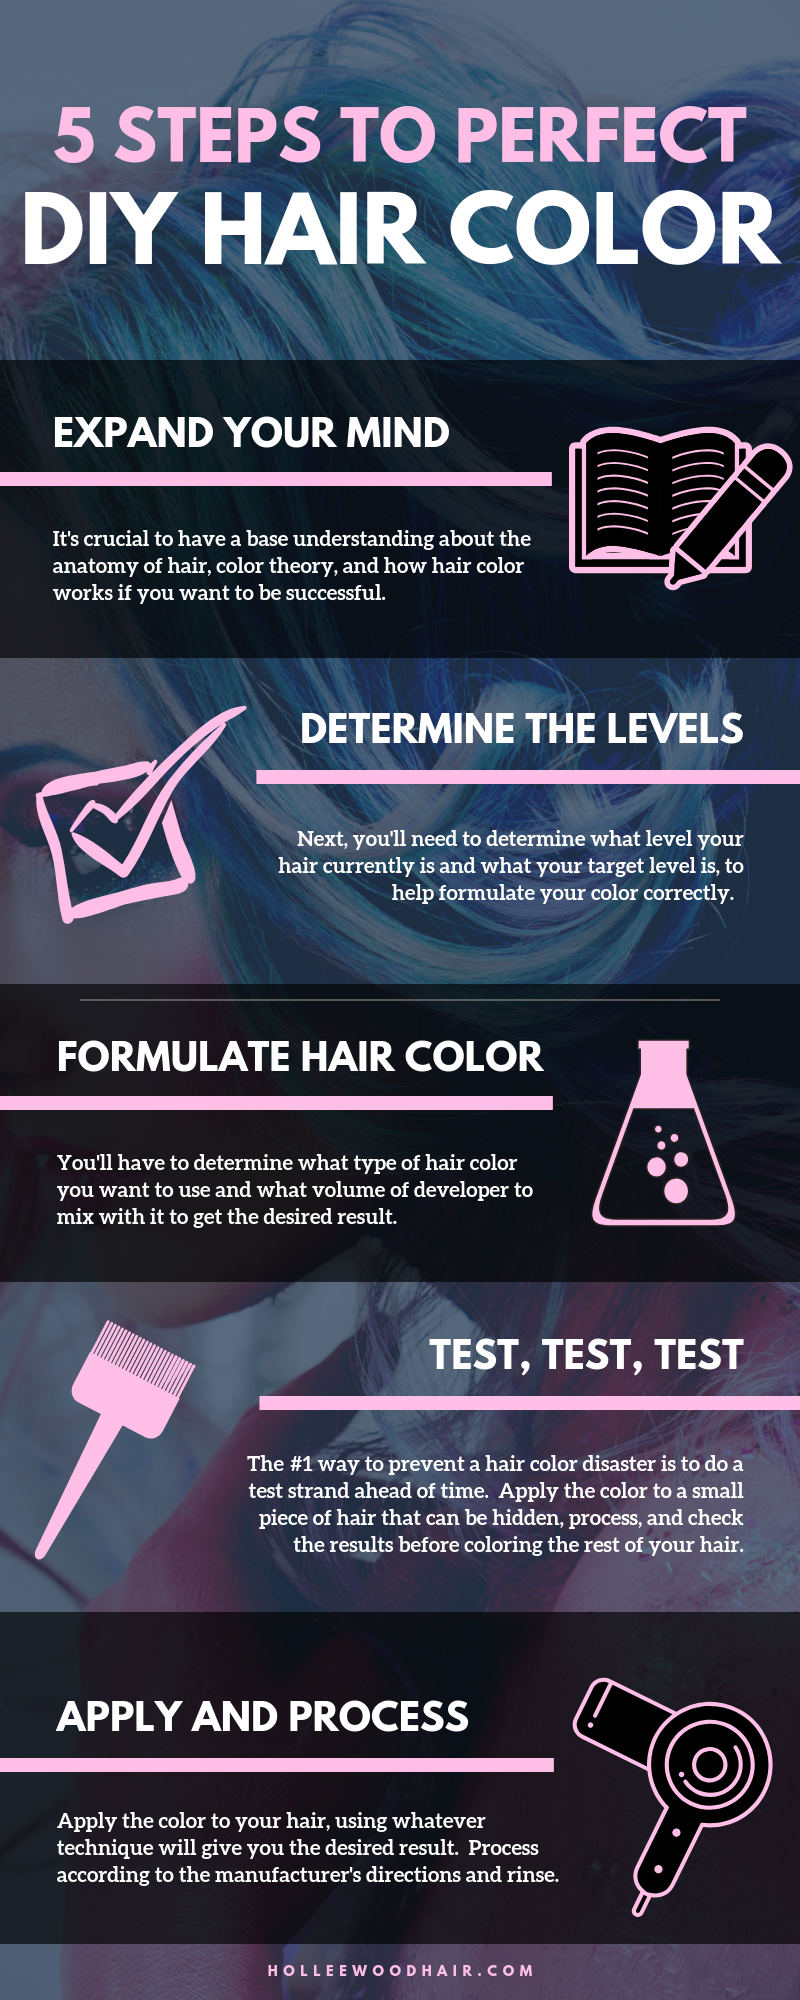 DIY Hair Color #infographic